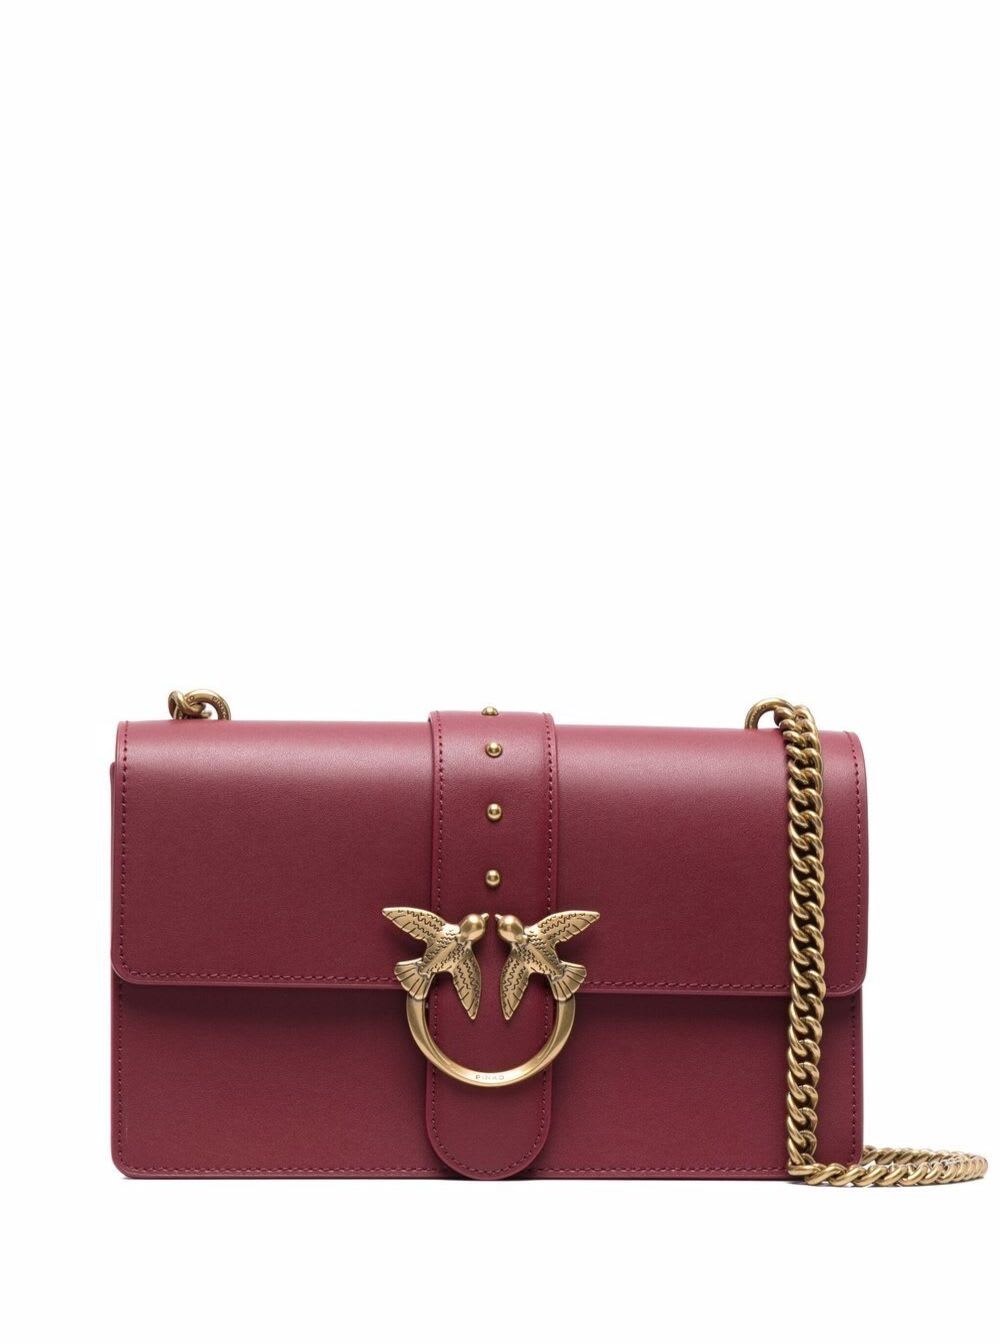 Pinko Love Classic Red Leather Crossbody Bag With Logo Buckle